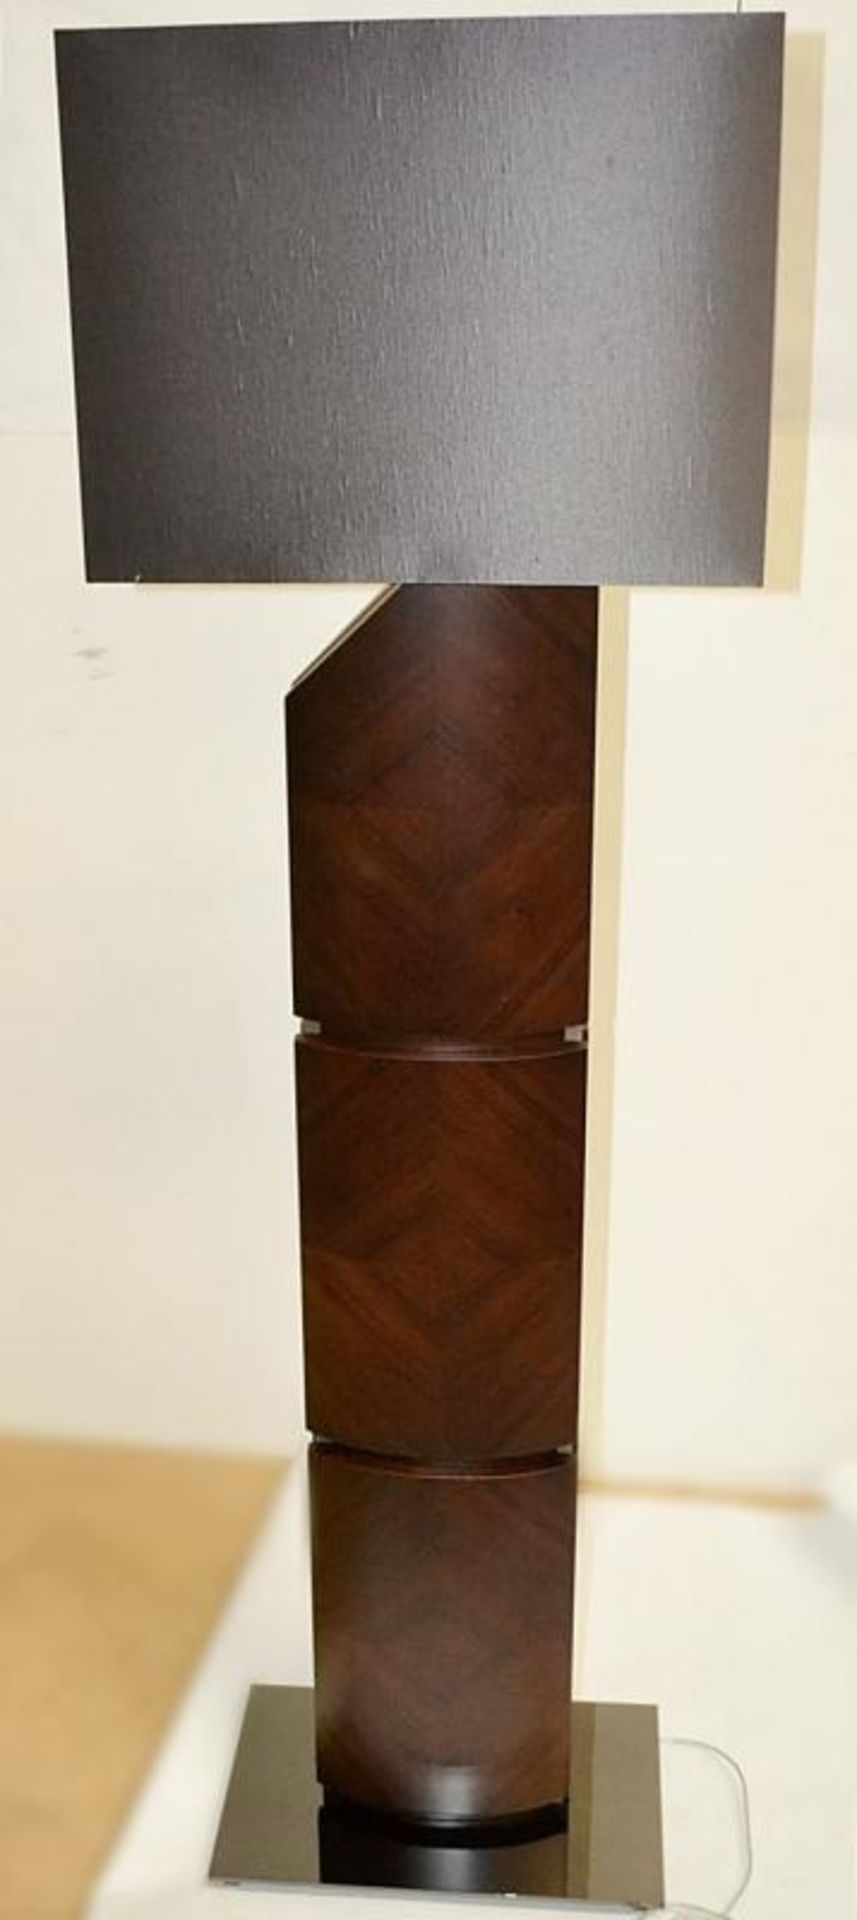 1 x SMANIA 'Wi' Italian Luxury Floor Lamp In Leather With Rectangular Shade - Ref: 6078343 P2/19 - C - Image 11 of 11